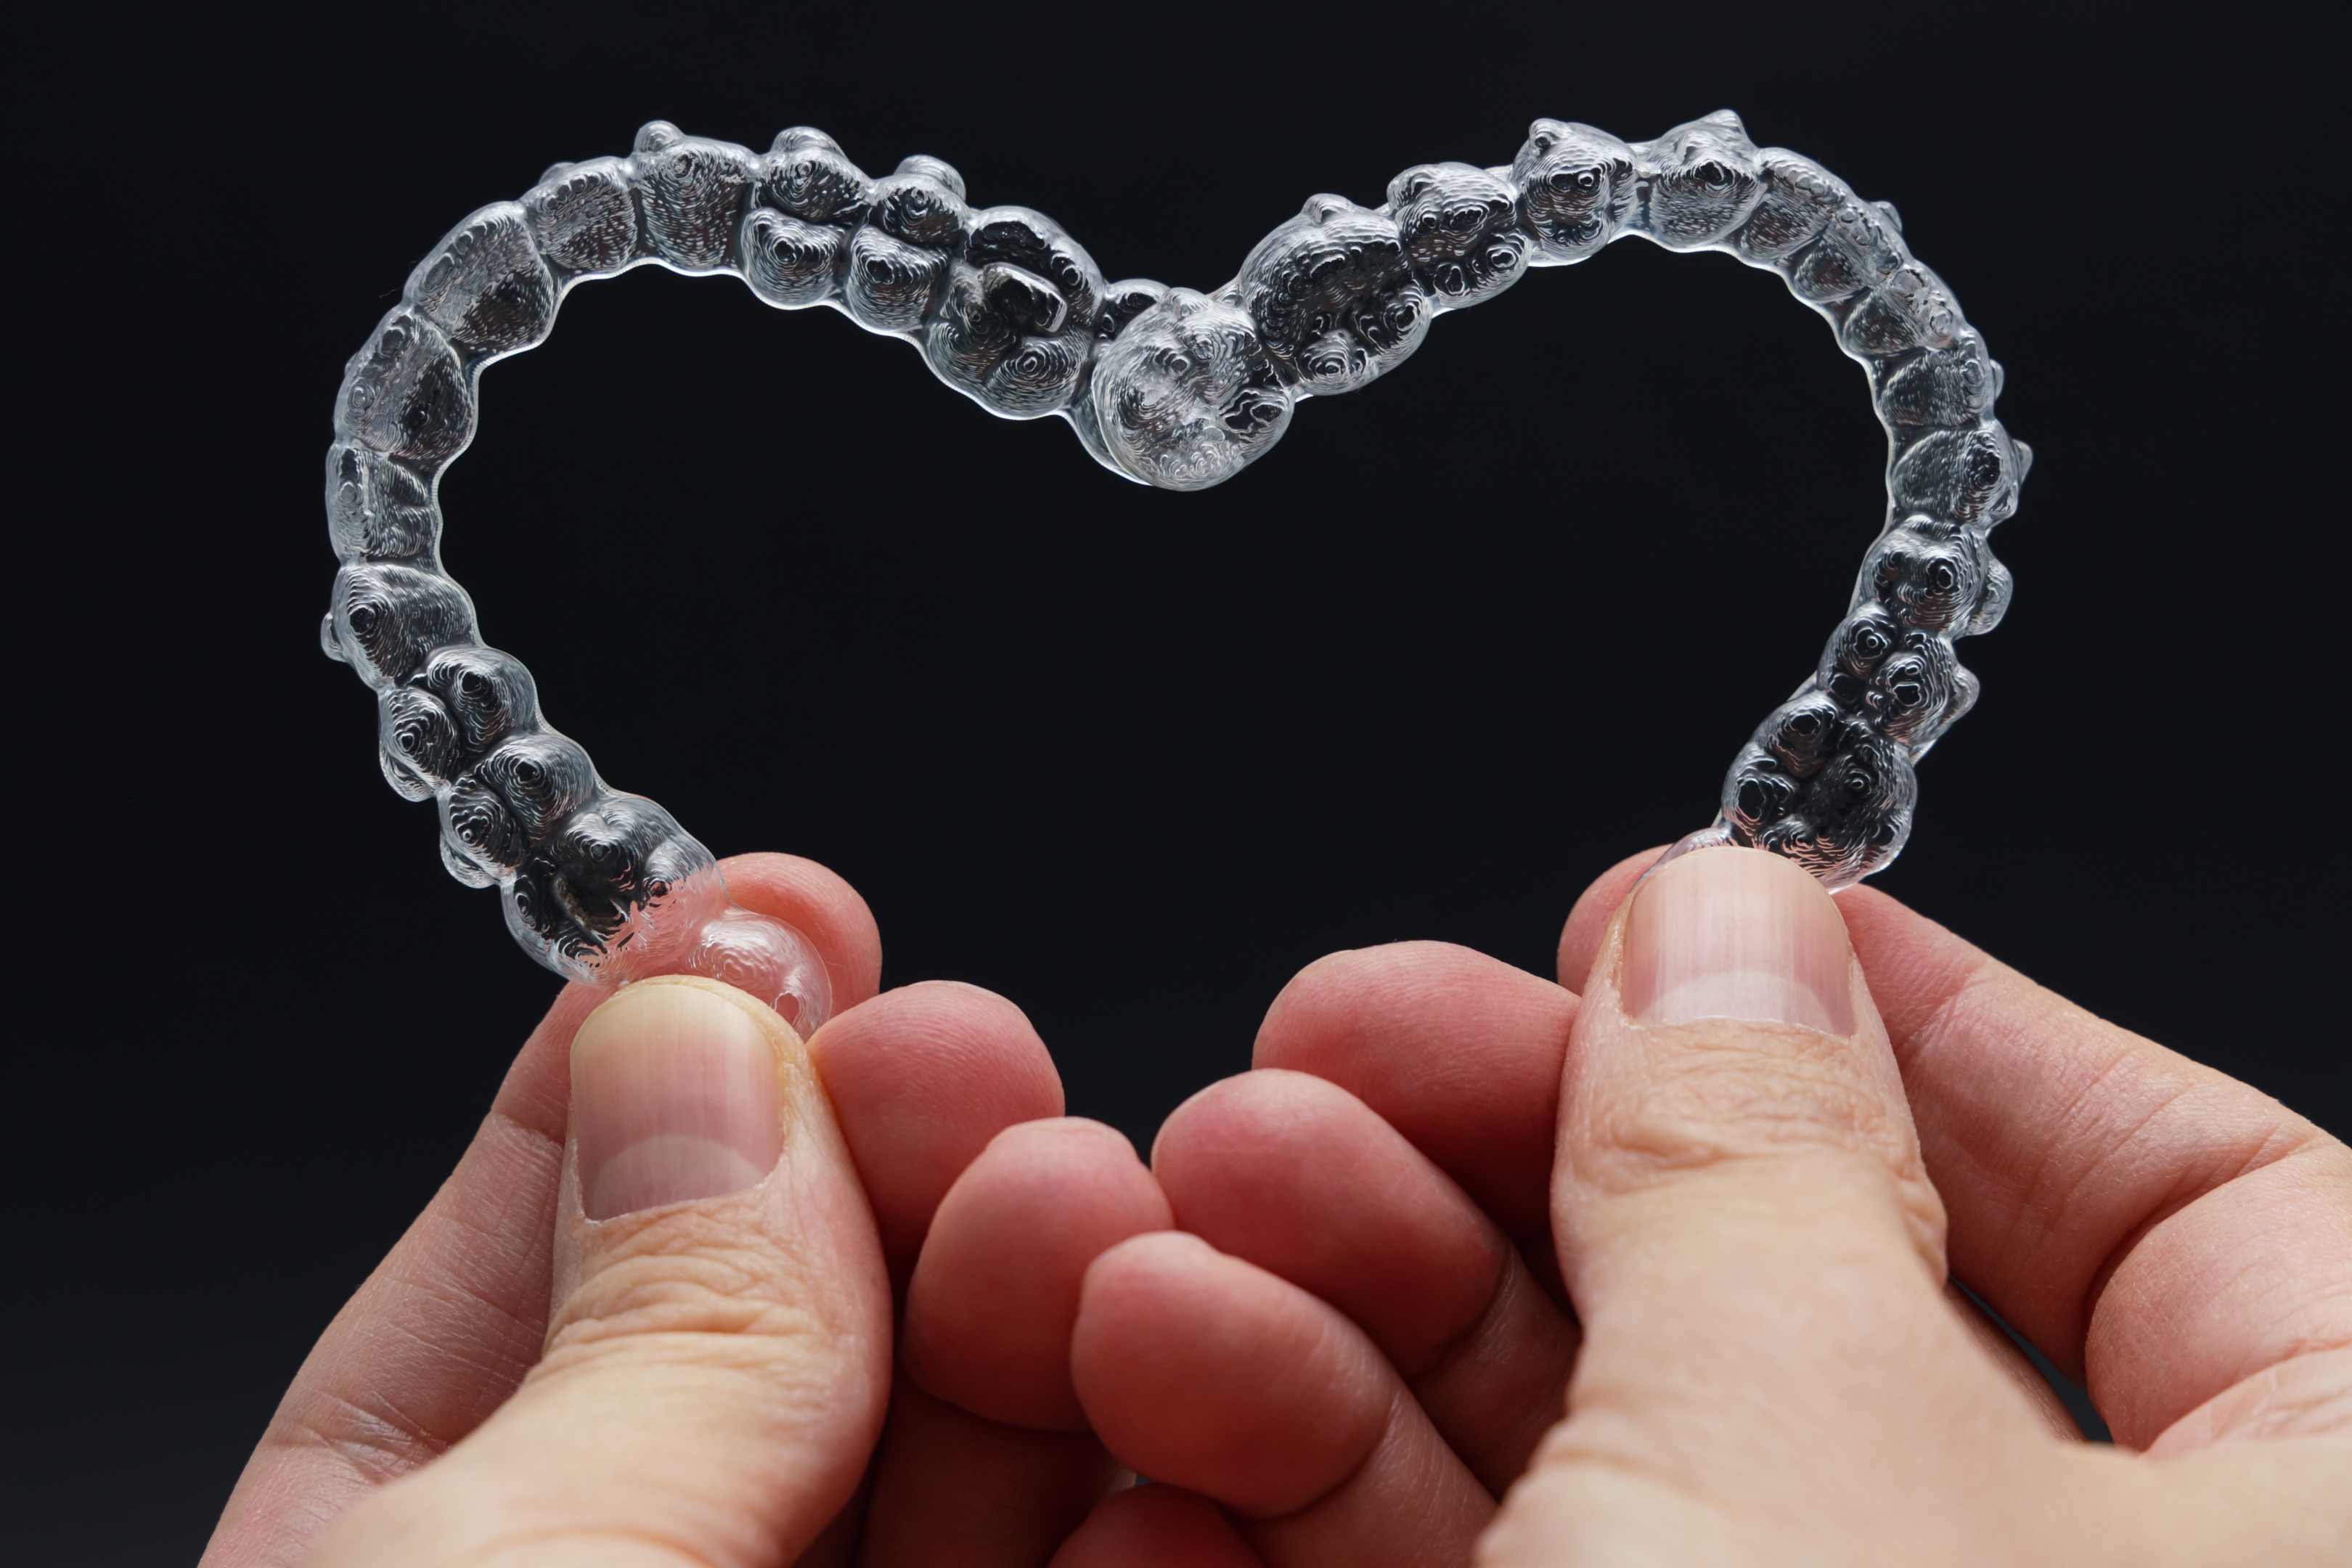 hands holding Invisalign clear aligners in shape of heart